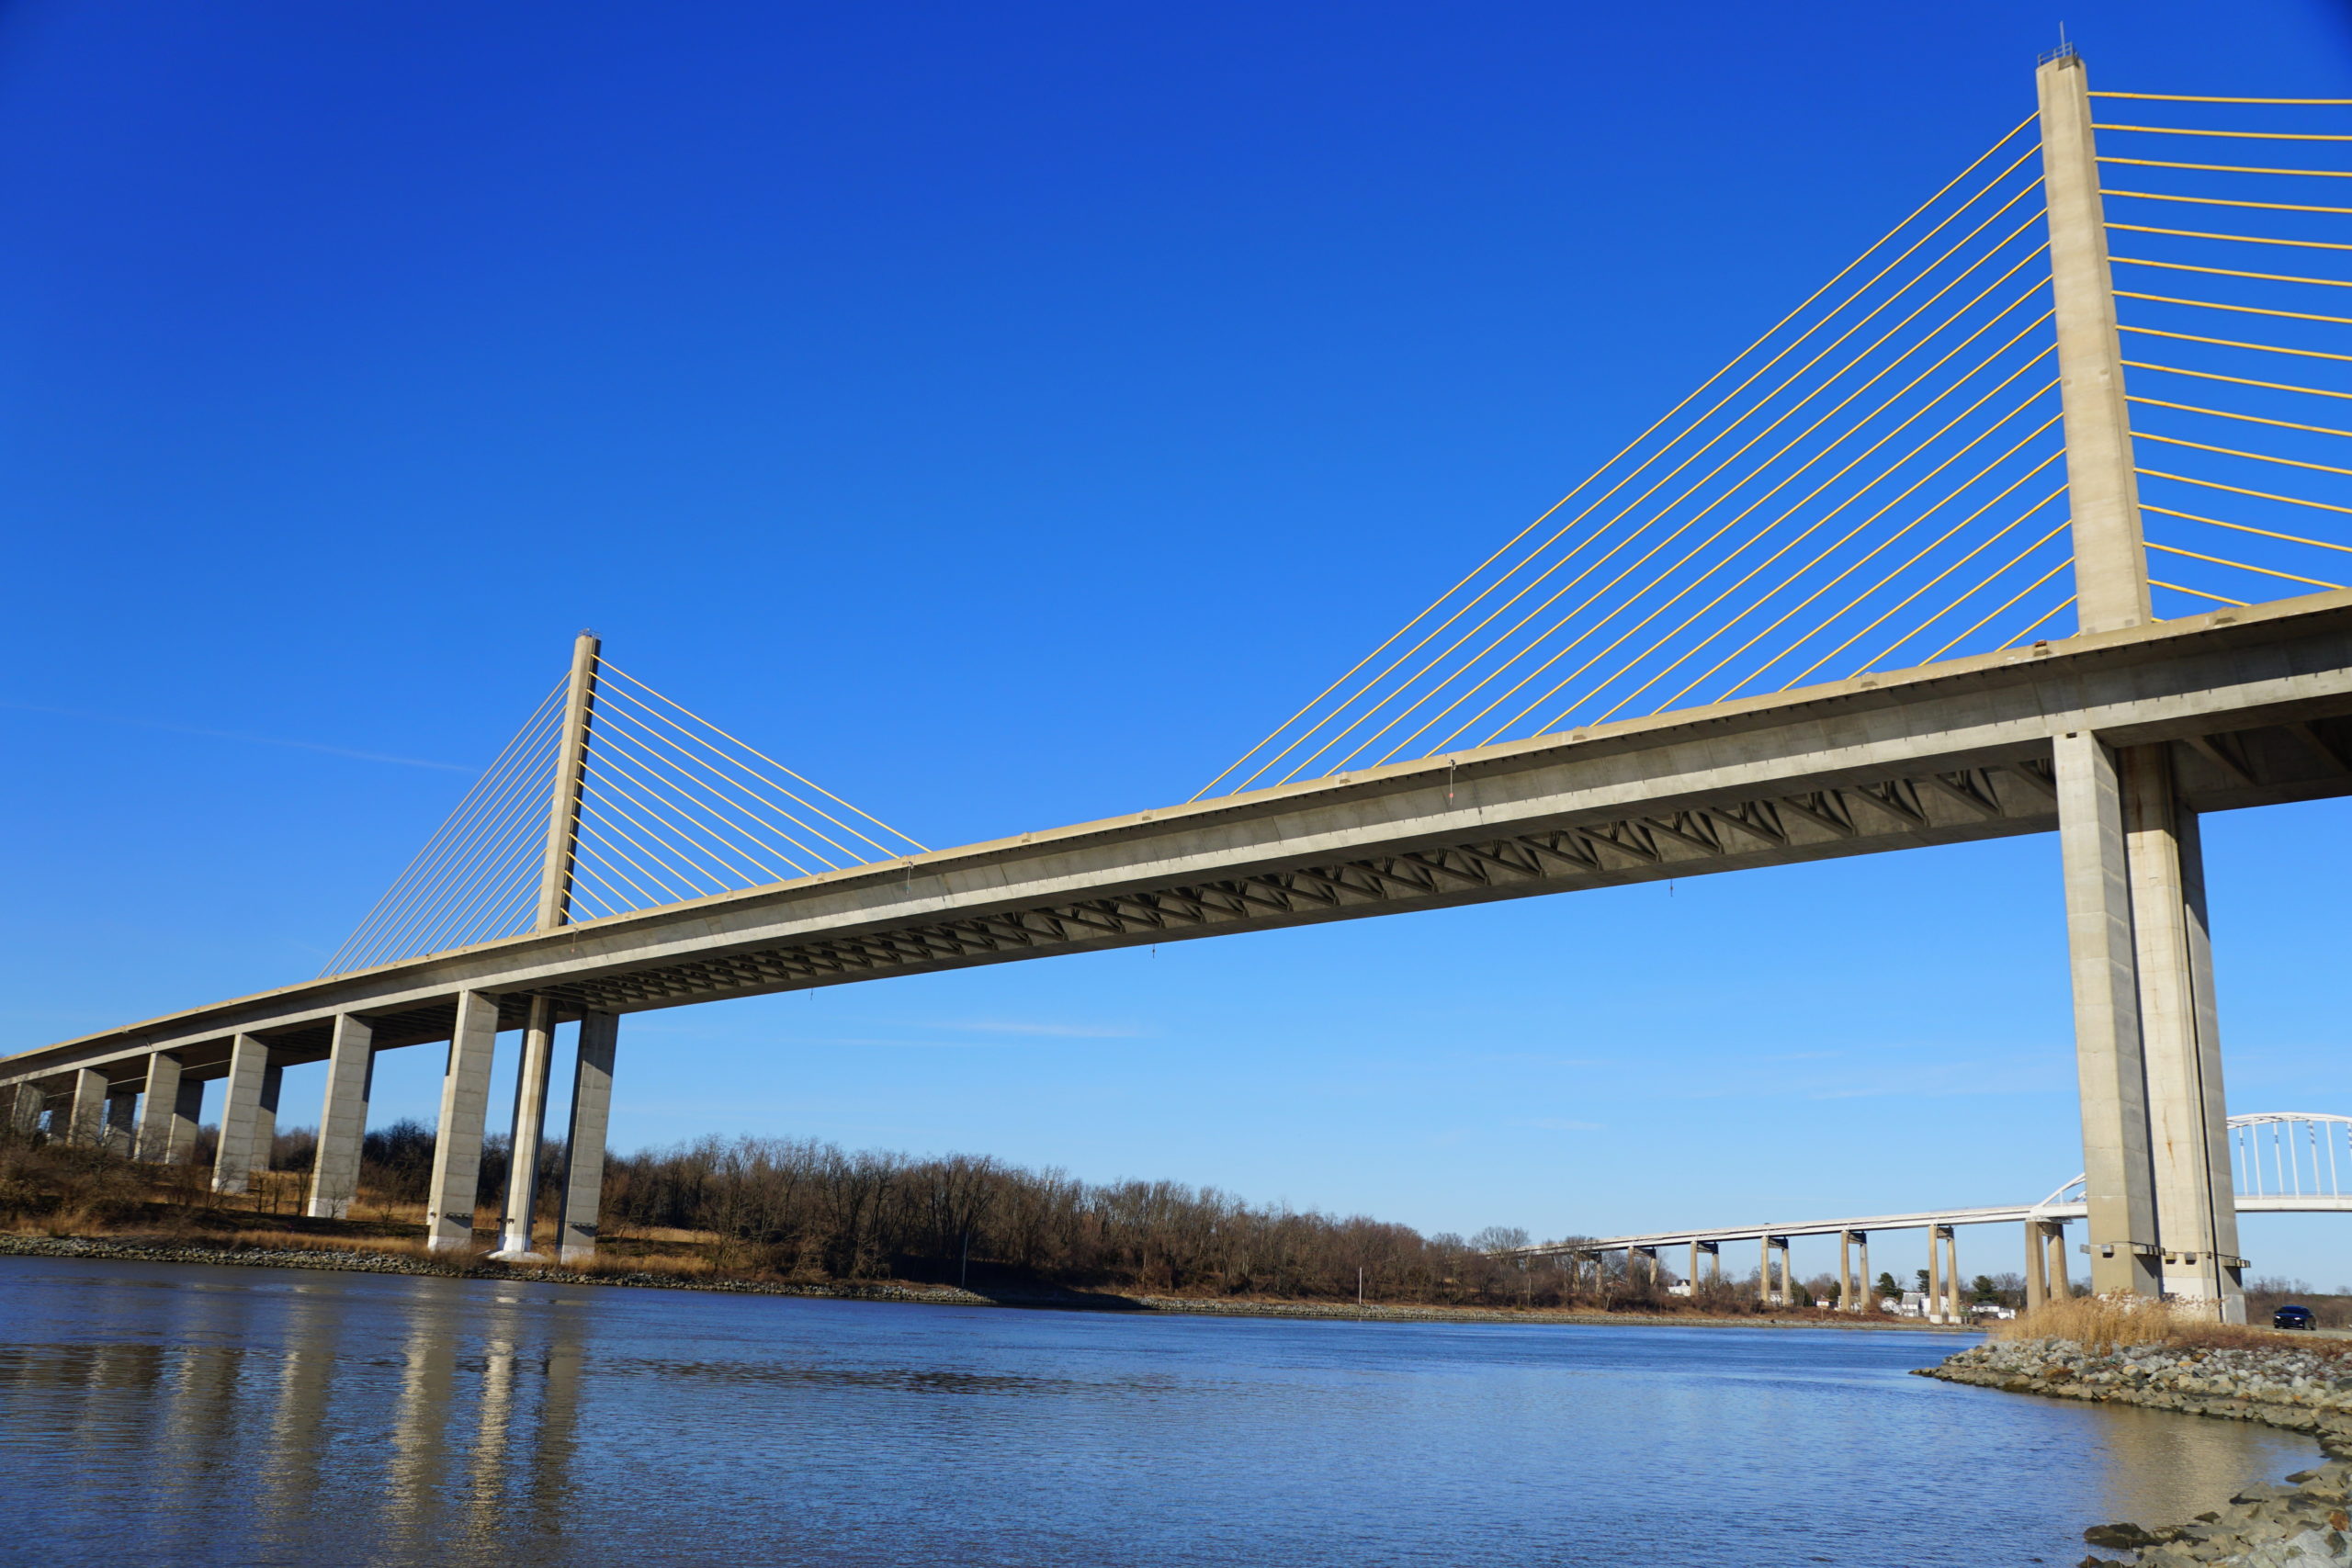 The view of William V Roth Bridge above the Chesapeake Canal near Middletown, Delaware.